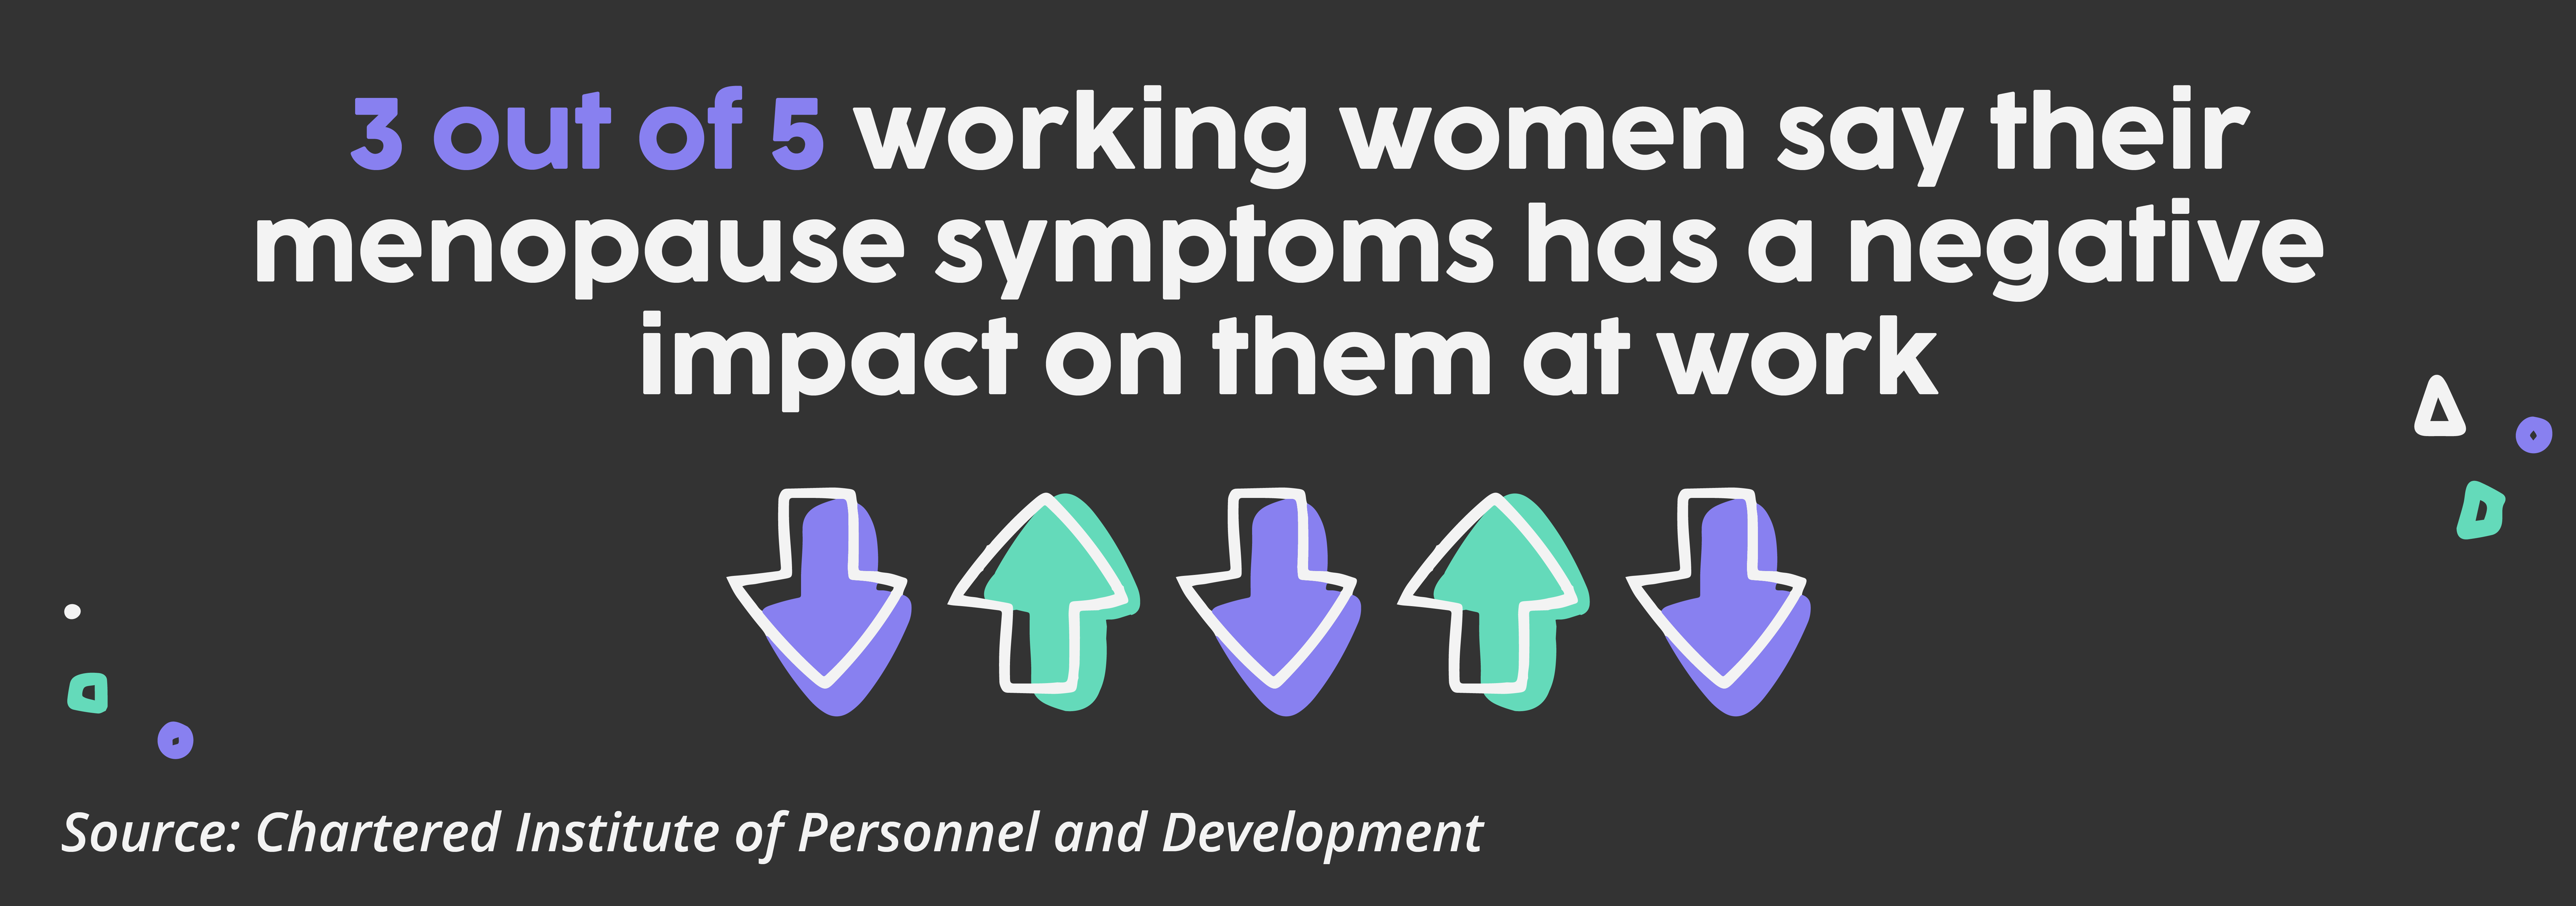 3 out of 5 working women between the ages of 45 and 55 who are experiencing menopause symptoms say it has a negative impact on them at work”.  Source: Chartered Institute of Personnel and Development